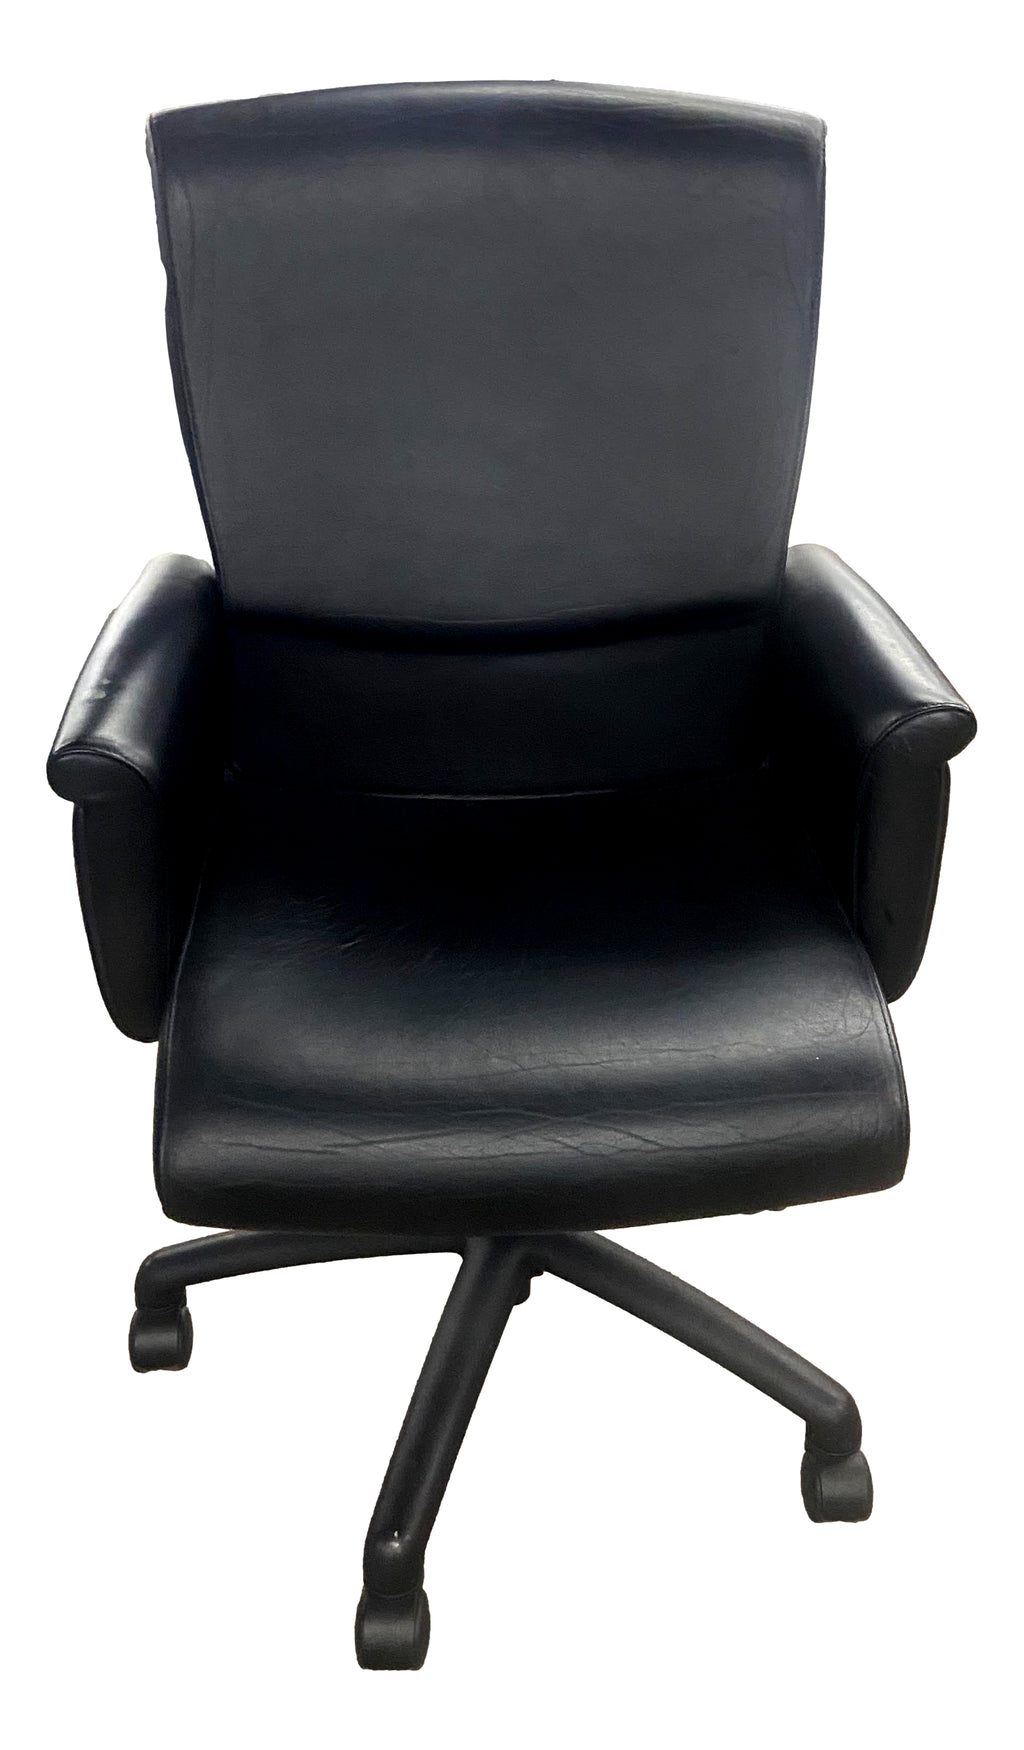 Pre-Owned Leather High-Back Swivel Chair